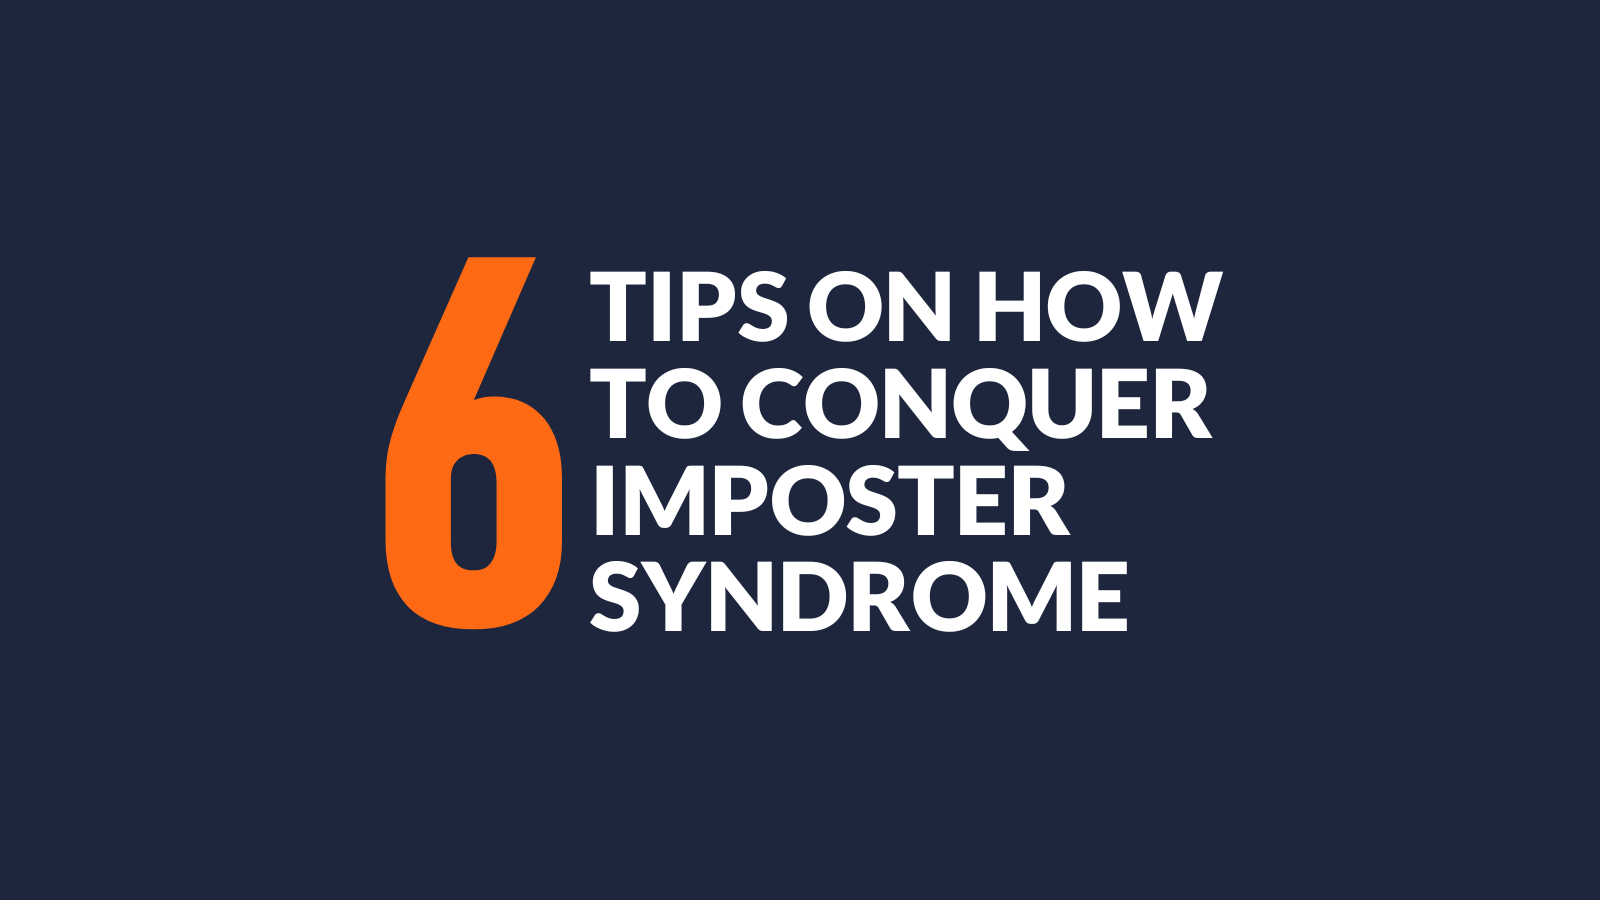 6 TIPS ON HOW TO CONQUER IMPOSTER SYNDROME